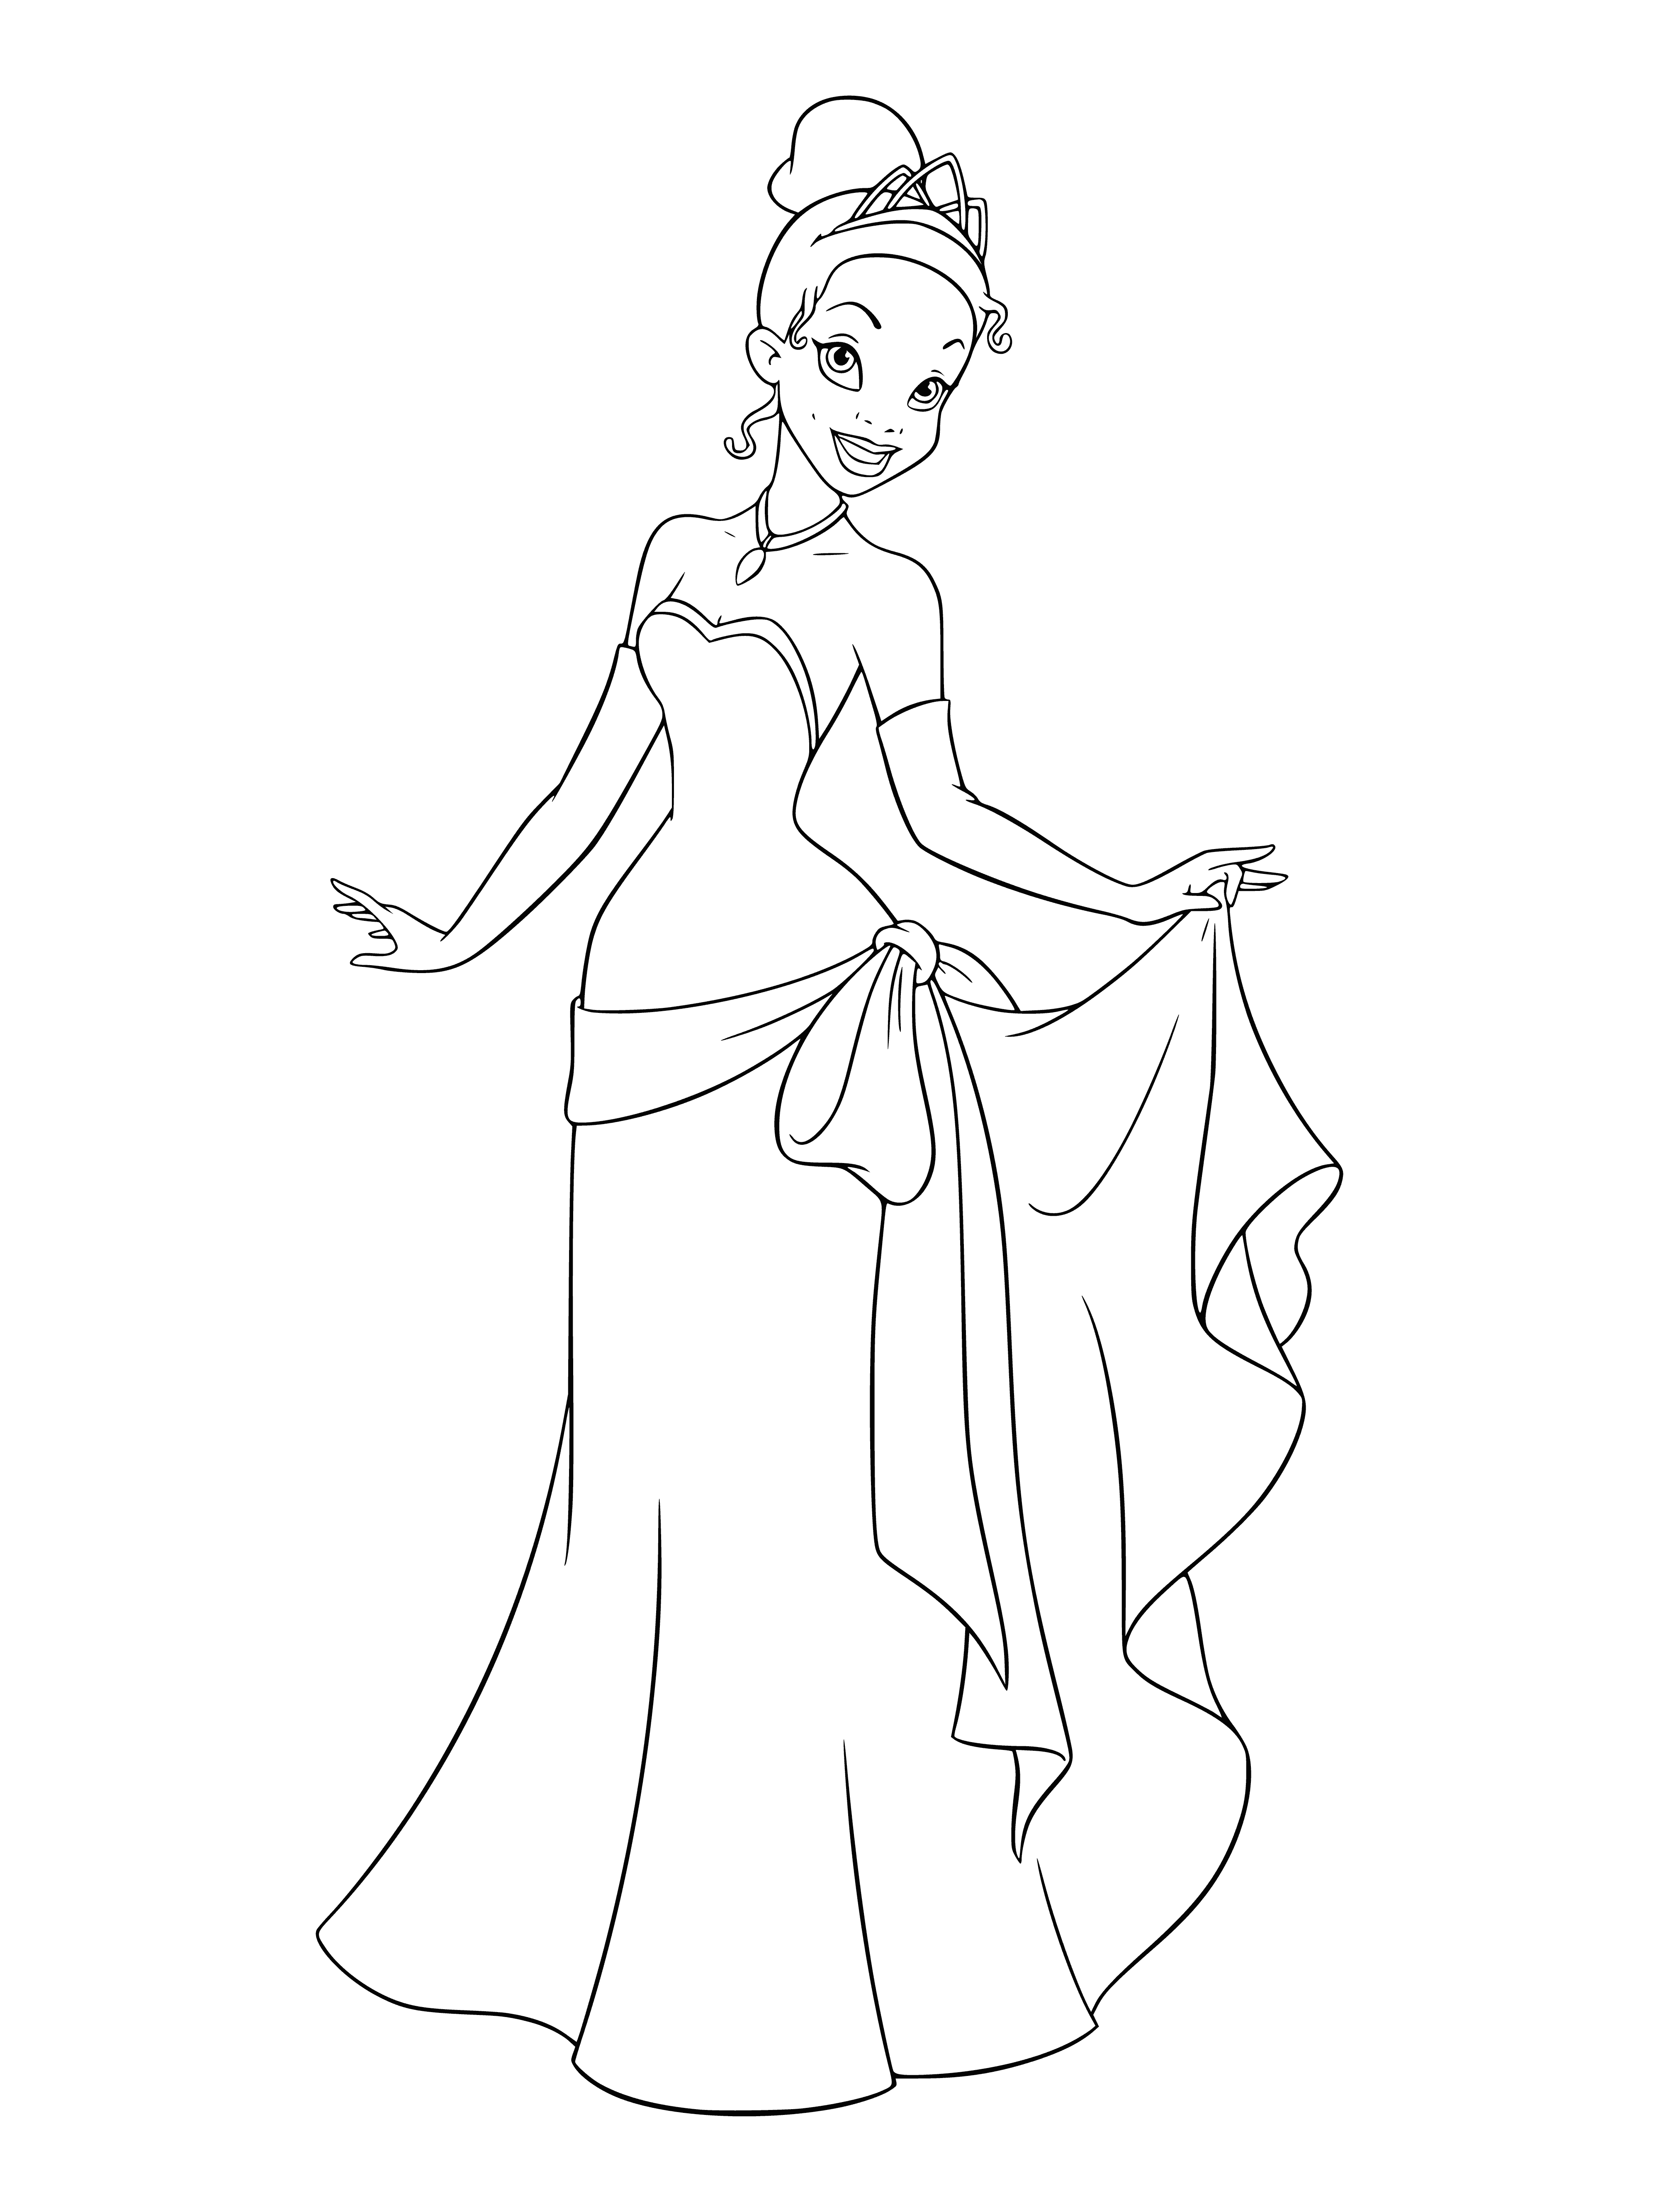 coloring page: Young woman stands in profile w/green dress, white apron & collar. Hair pulled back, right hand on hip, left hand holding trumpet flower.